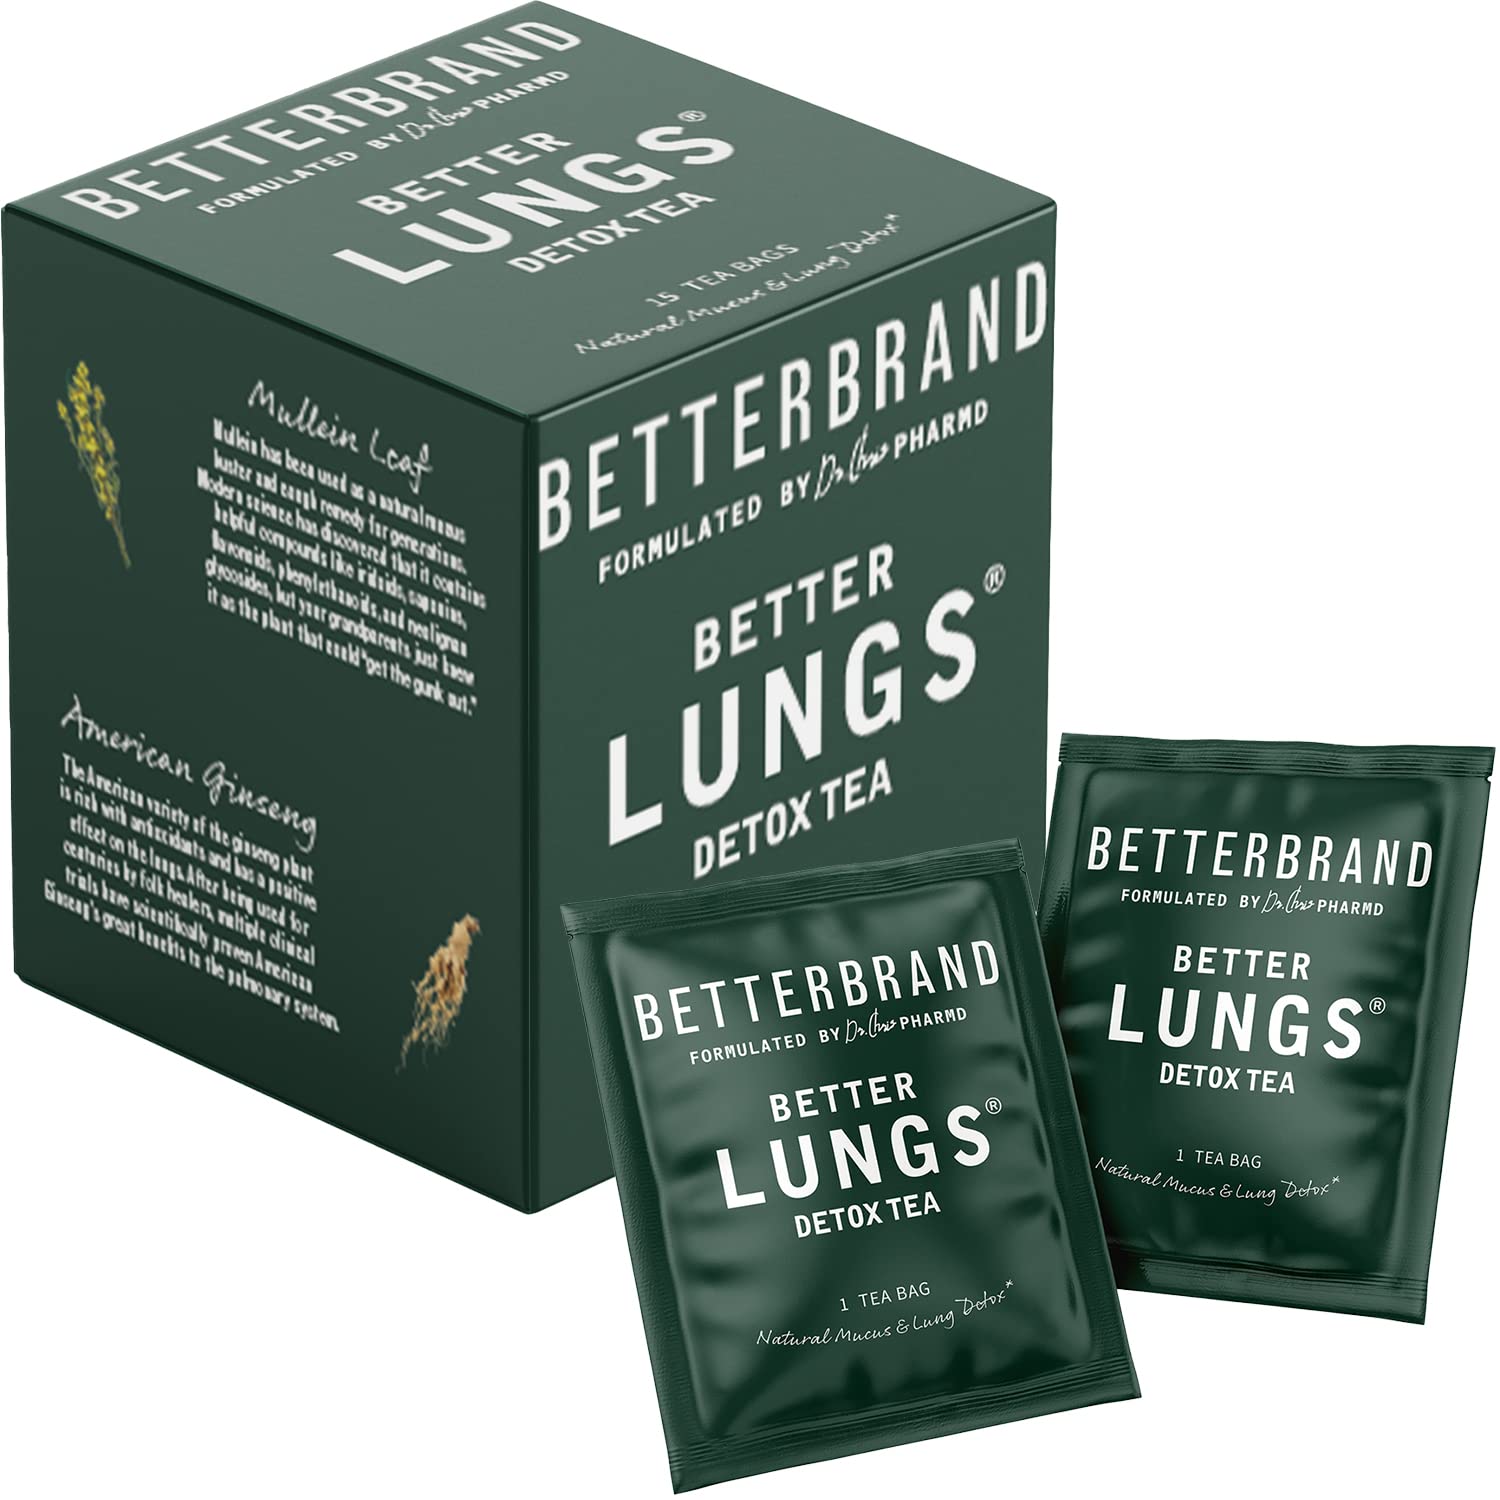 Betterbrand Better Lungs Detox Tea - Herbal Tea Bags - Mullein Leaf, Ginseng, Elderberry, Ginger & Thyme for Lung Cleanse, Congestion Relief, Mucus Detox - 15 Individual Herbal Tea Bags, Caffeine Free